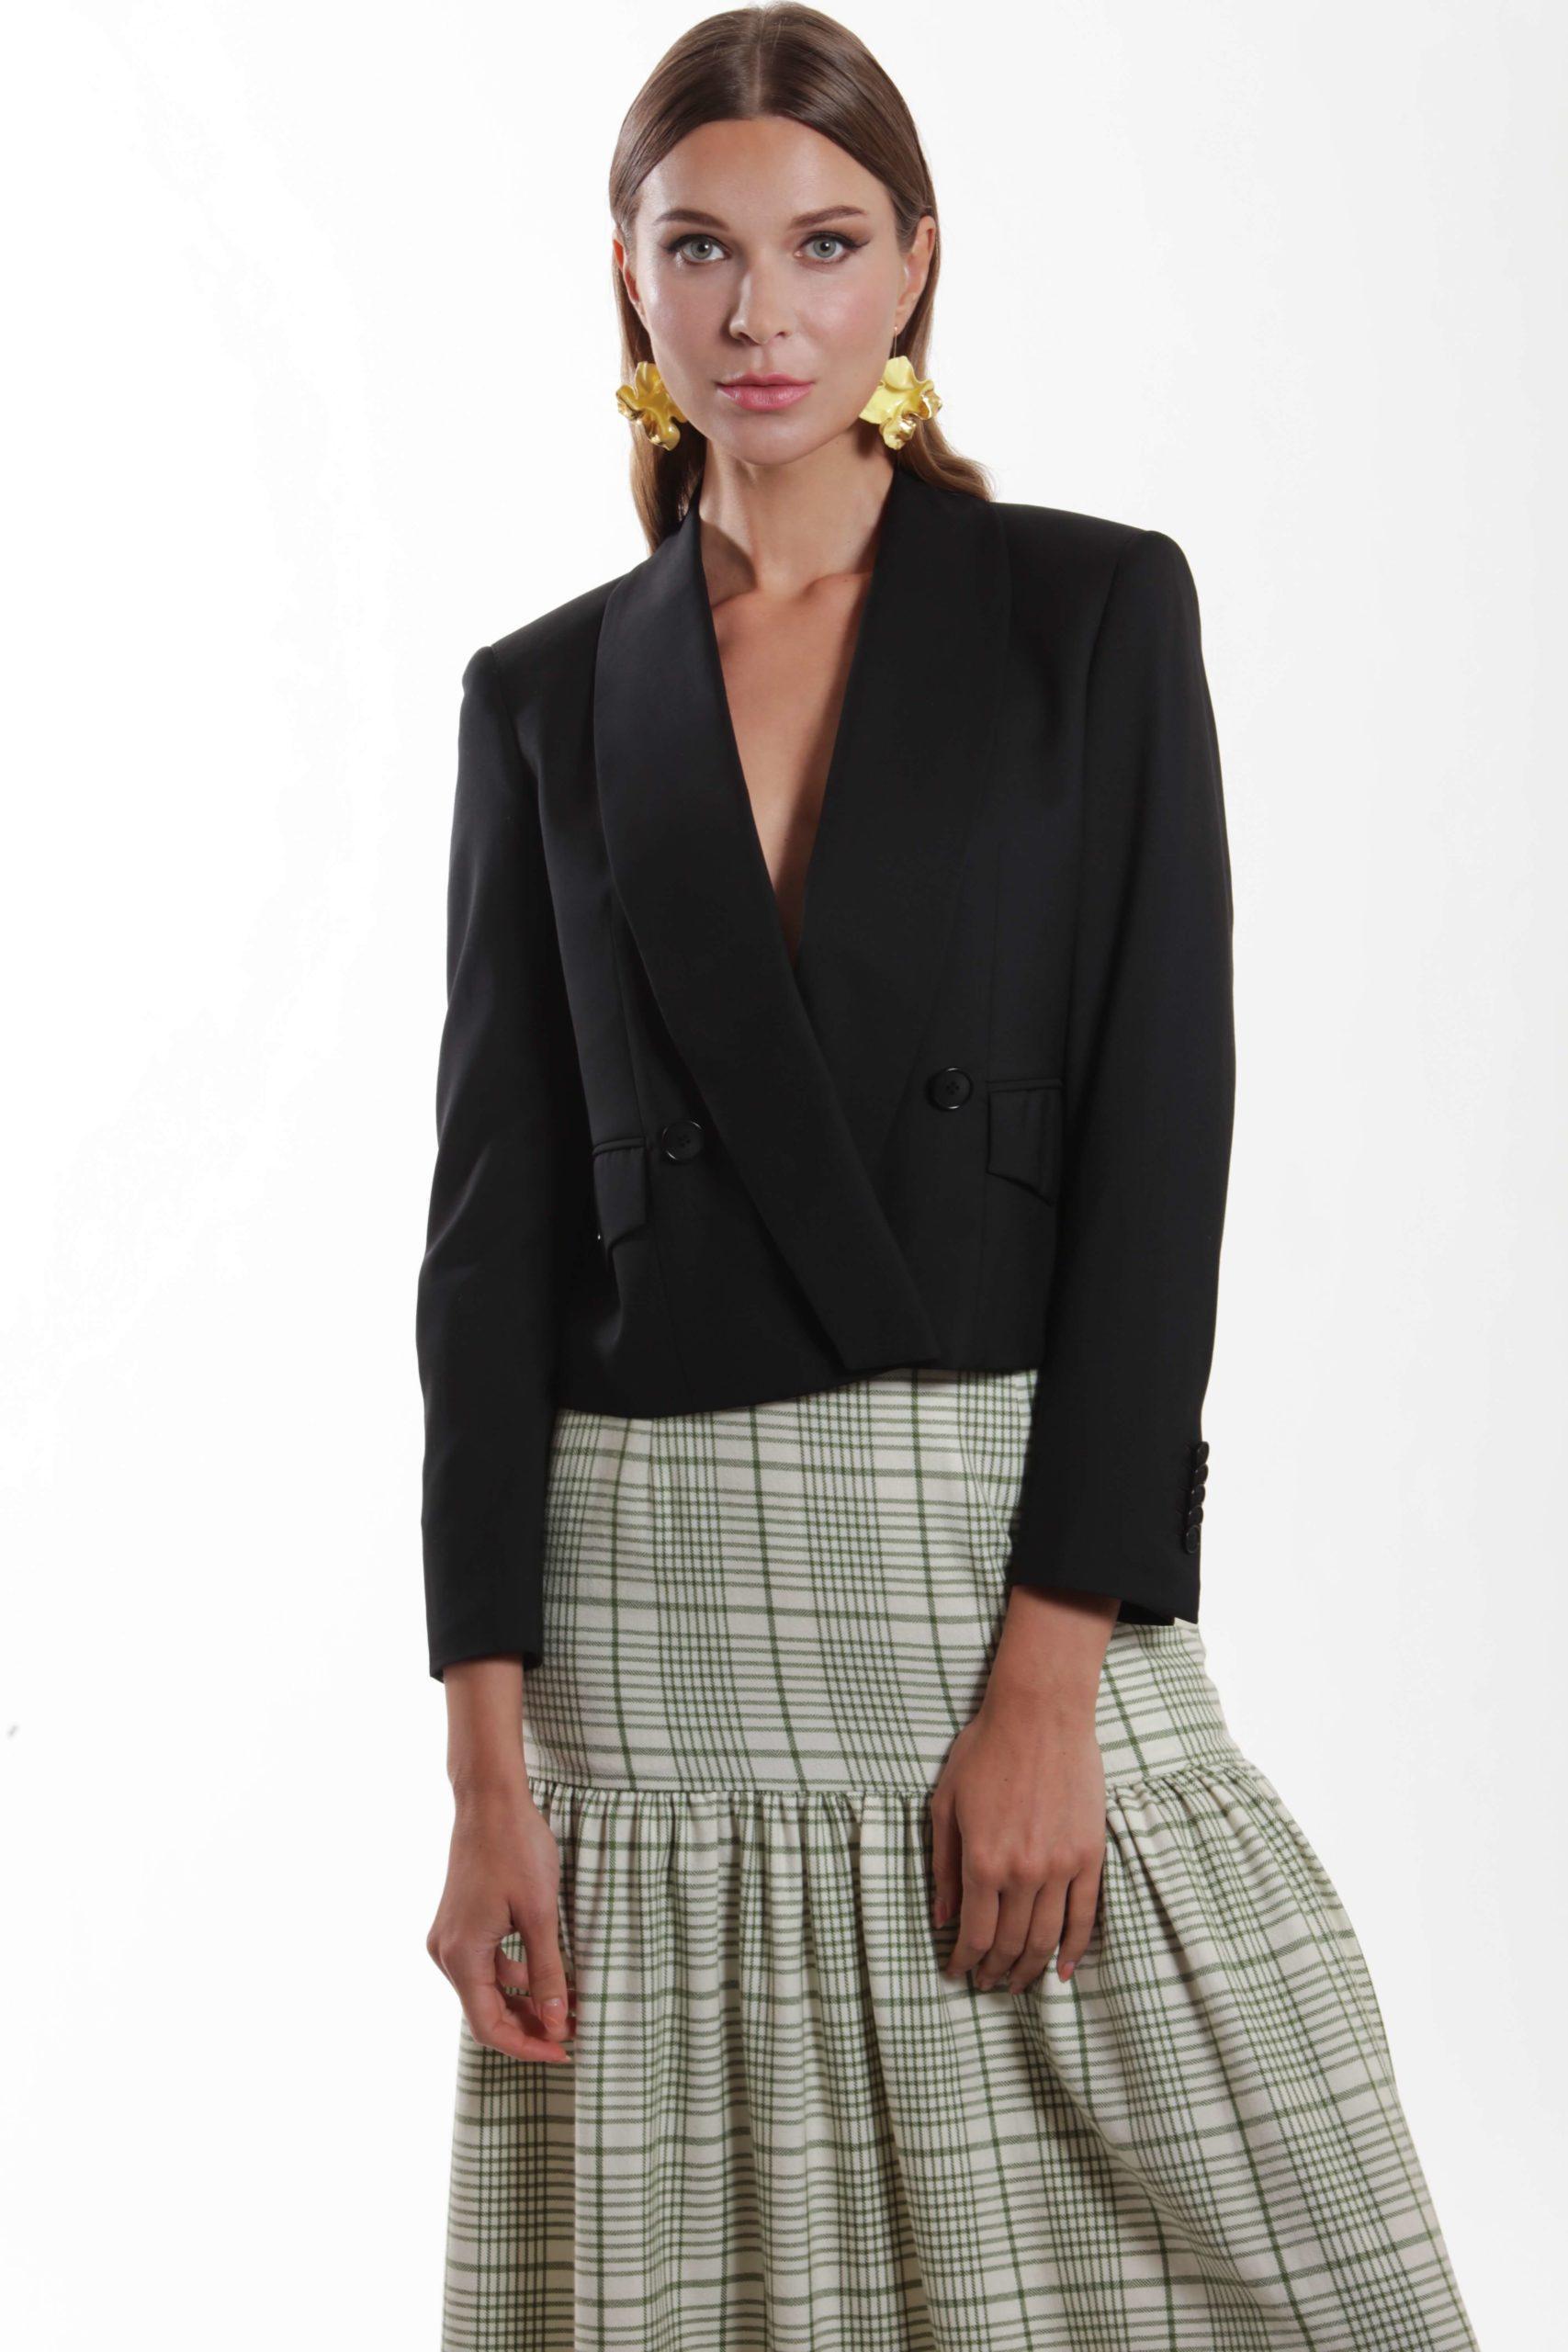 Grenoble – Cropped shawl collar wool jacket in black0